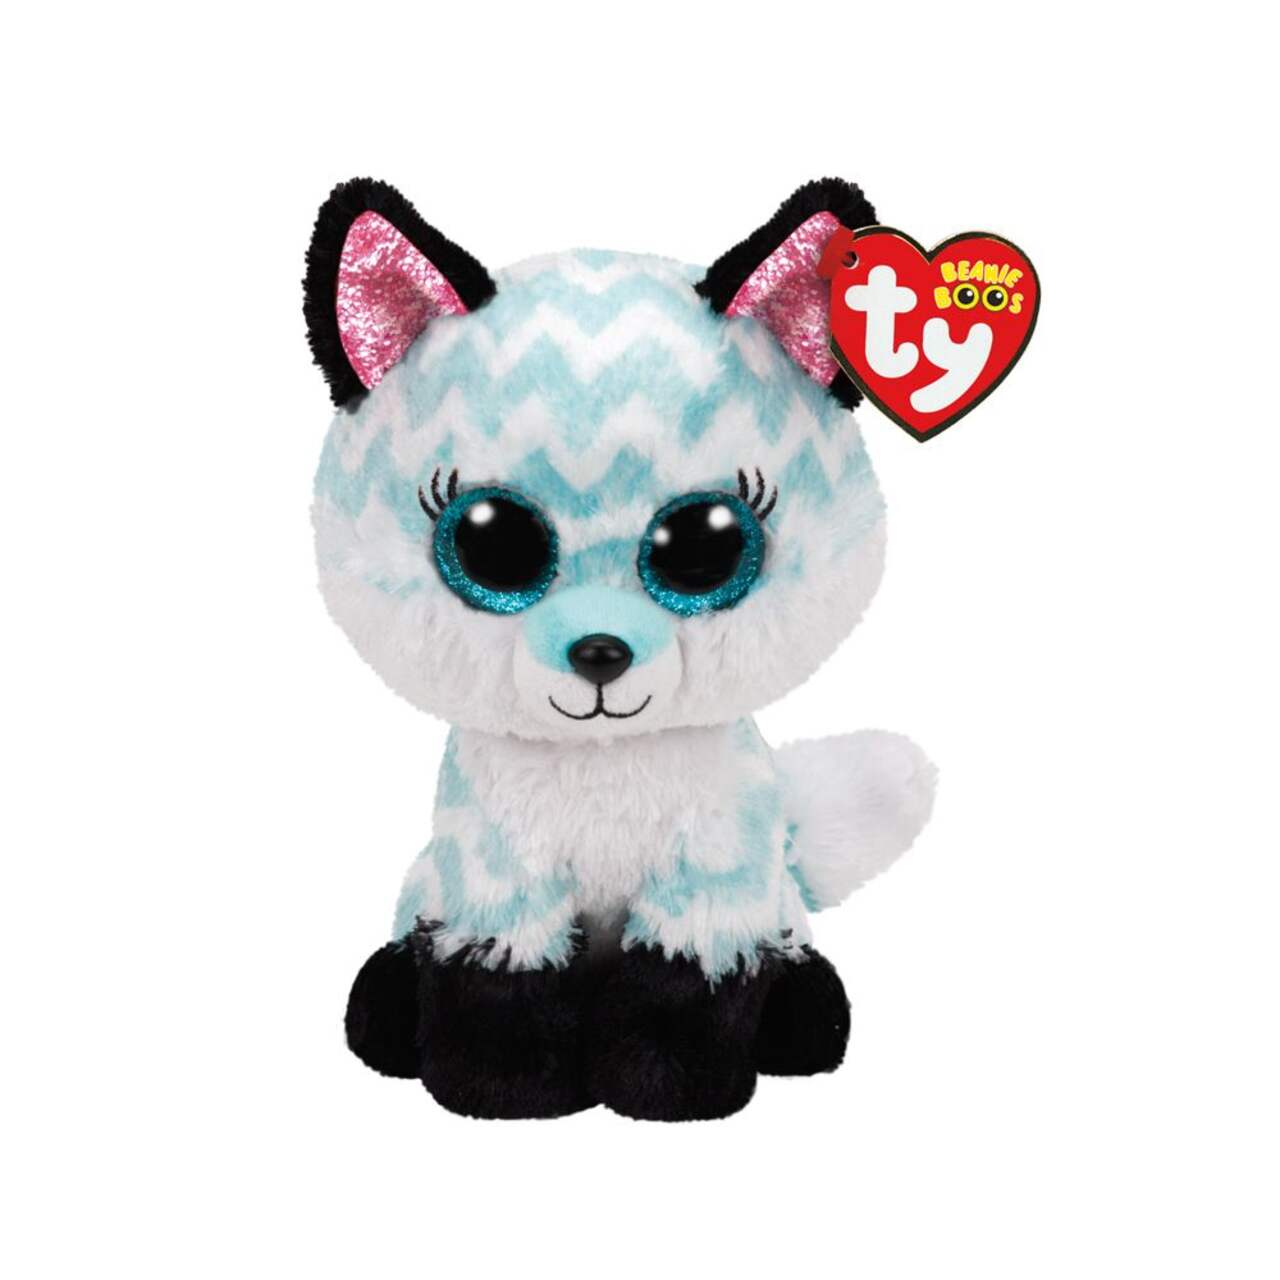 Ty Beanie Boos® Regular Recognizable Character Plush Animal Stuffed Toy,  Atlas the Aqua Fox, Ages 3+